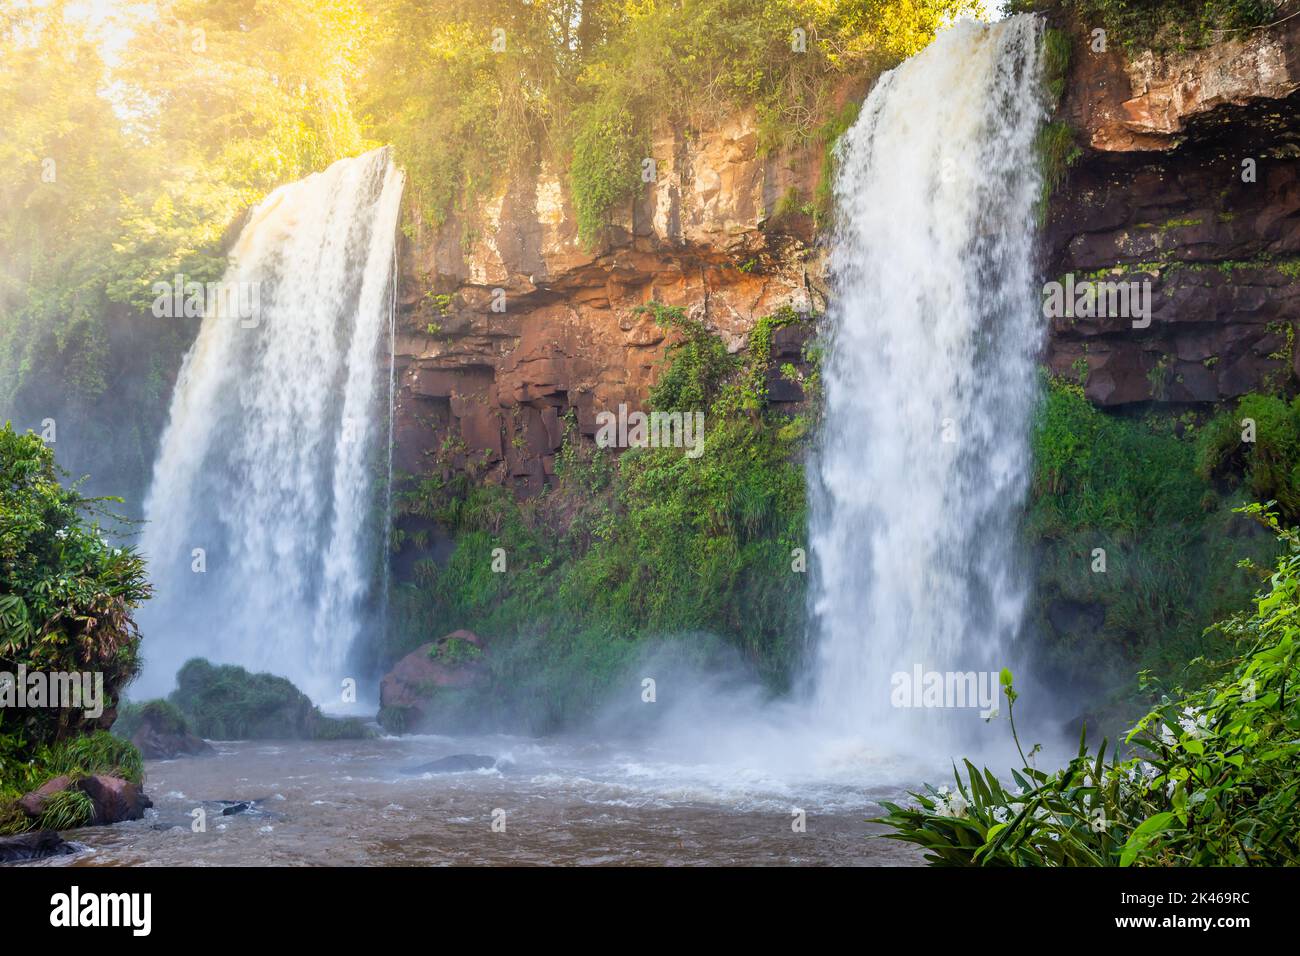 Iguazu Falls dramatic landscape, view from Argentina side, South America Stock Photo